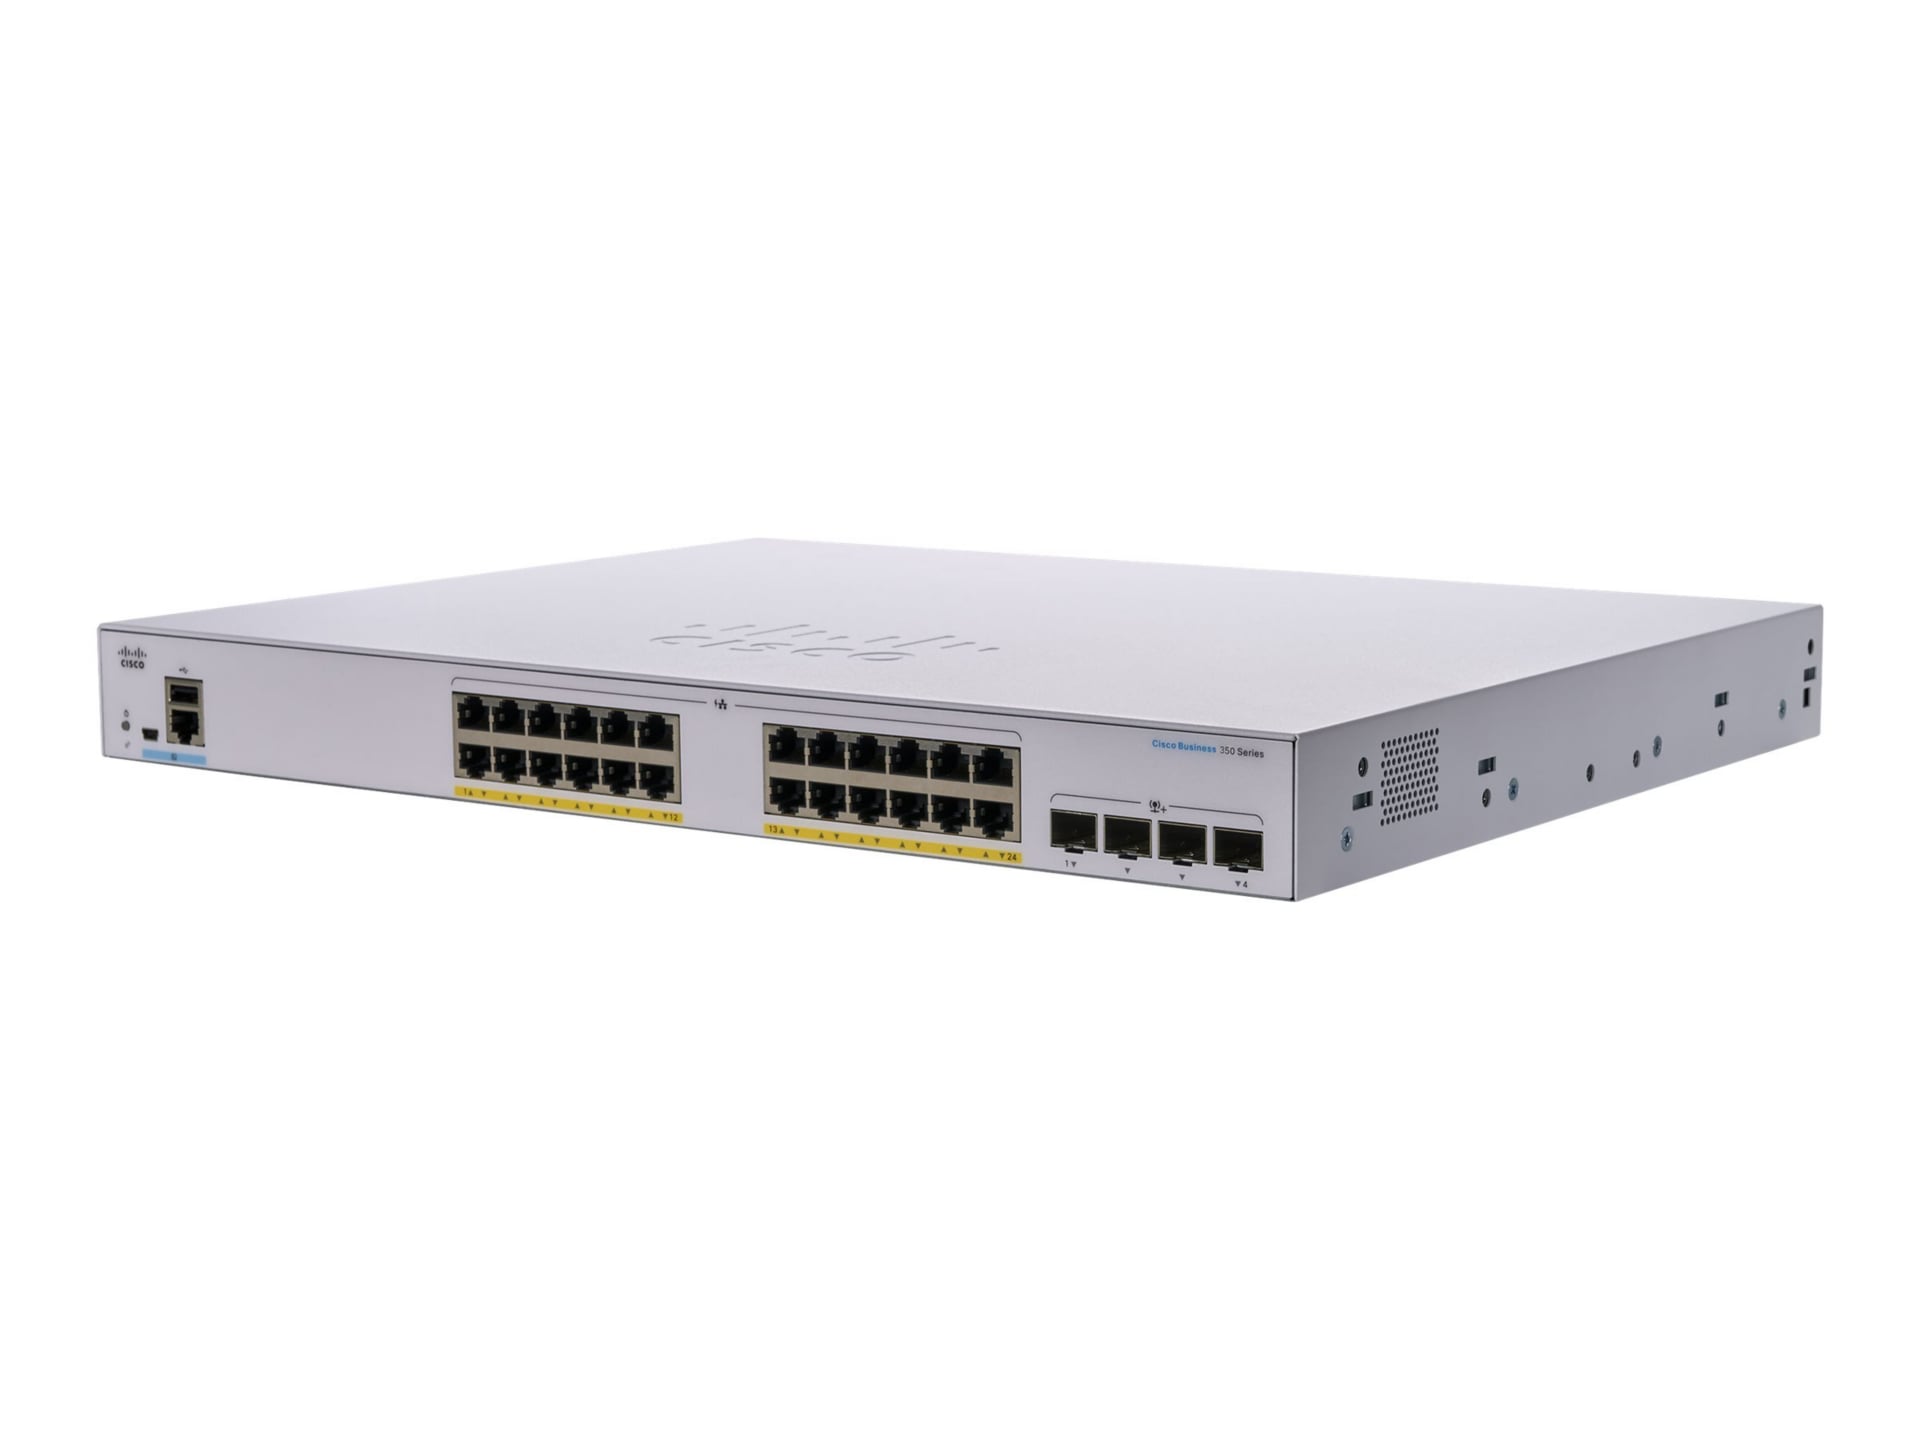 Cisco Business 350 Series CBS350-24FP-4X - switch - 24 ports - managed - rack-mountable